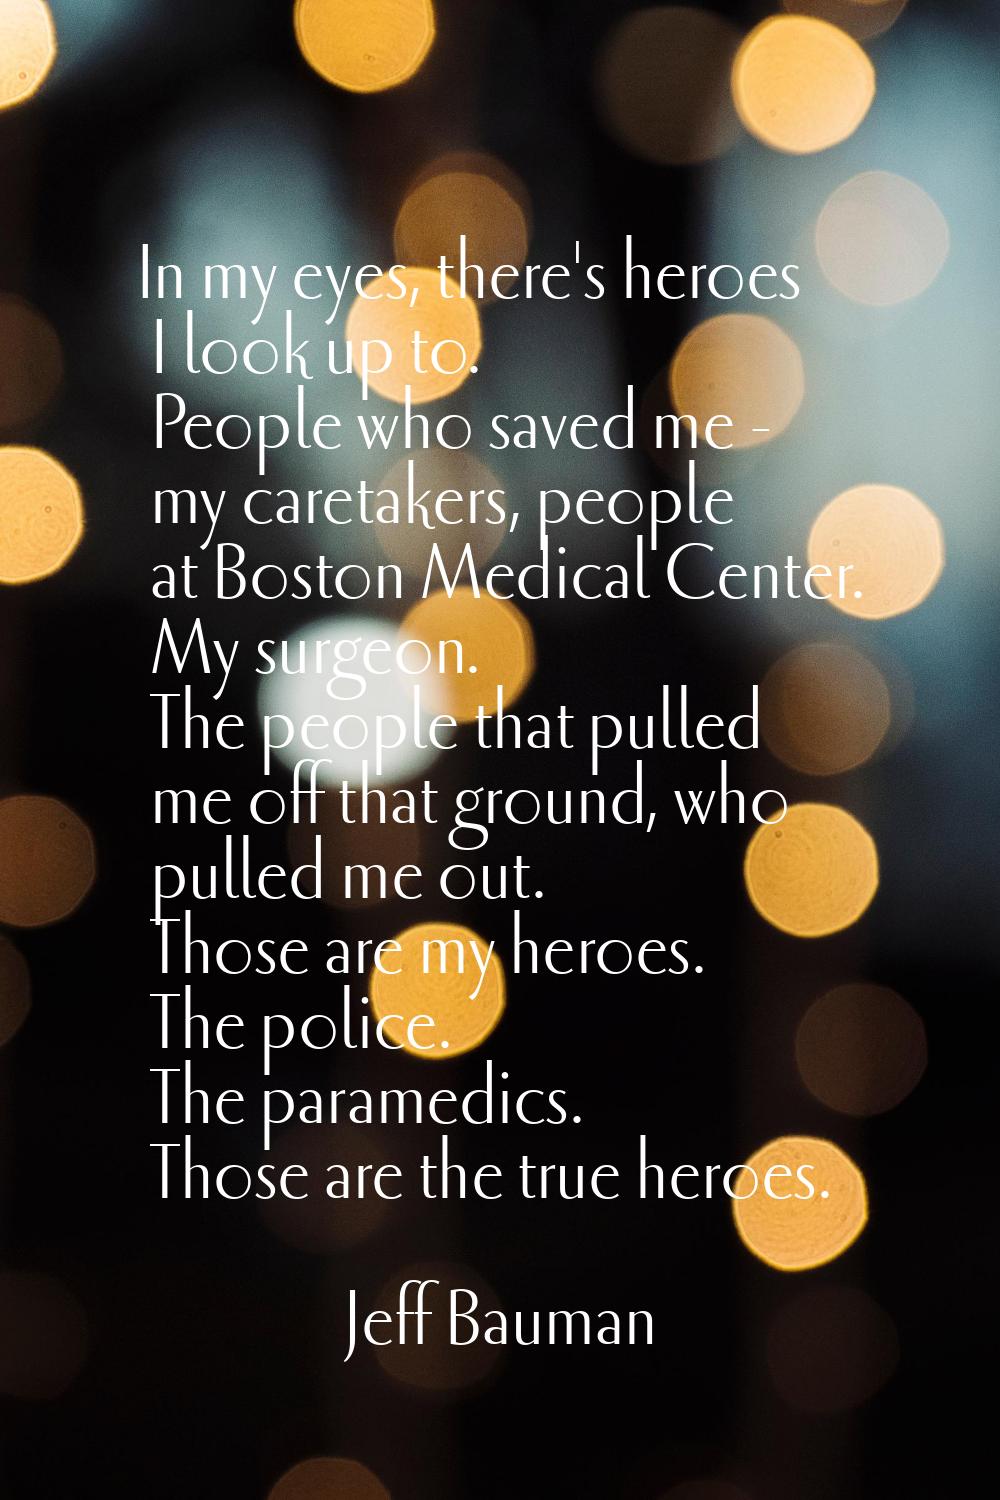 In my eyes, there's heroes I look up to. People who saved me - my caretakers, people at Boston Medi